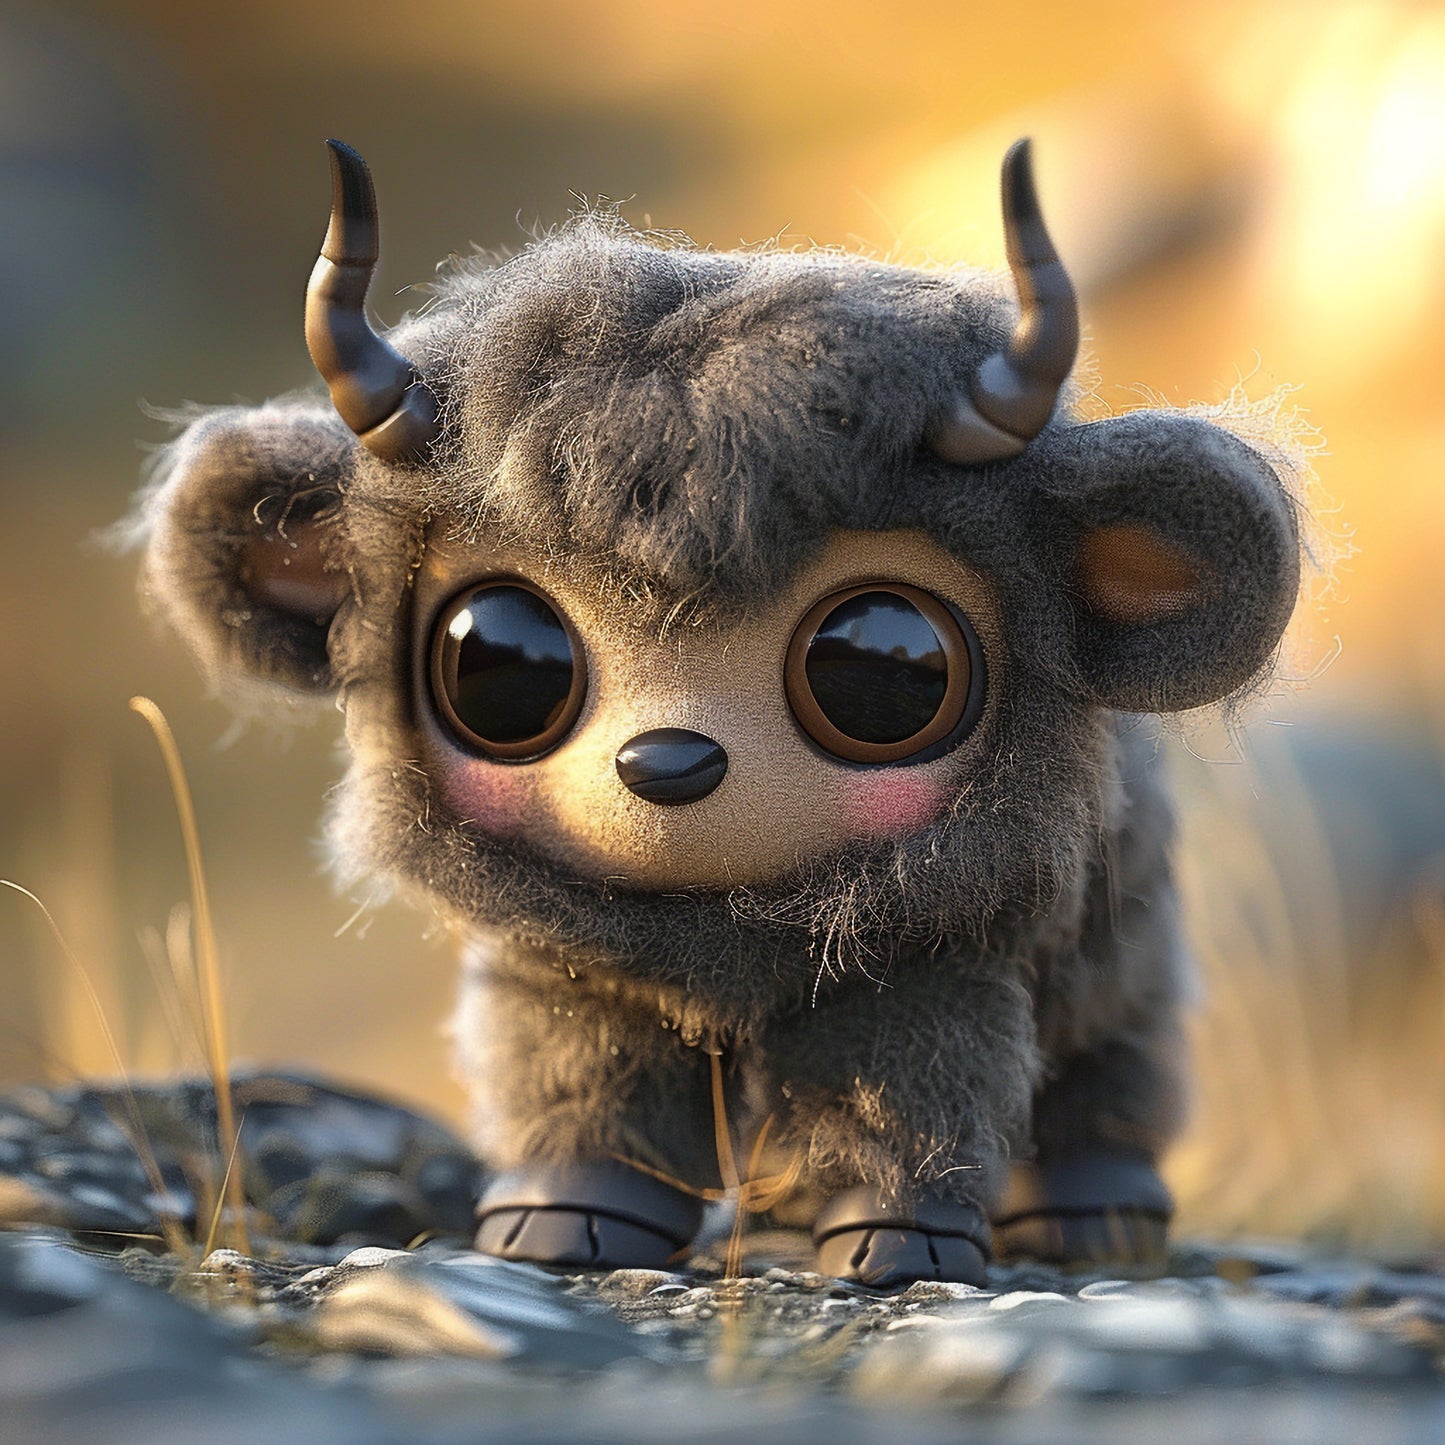 Adorable Needle Felted Muskox Toy with Big Eyes in a Field